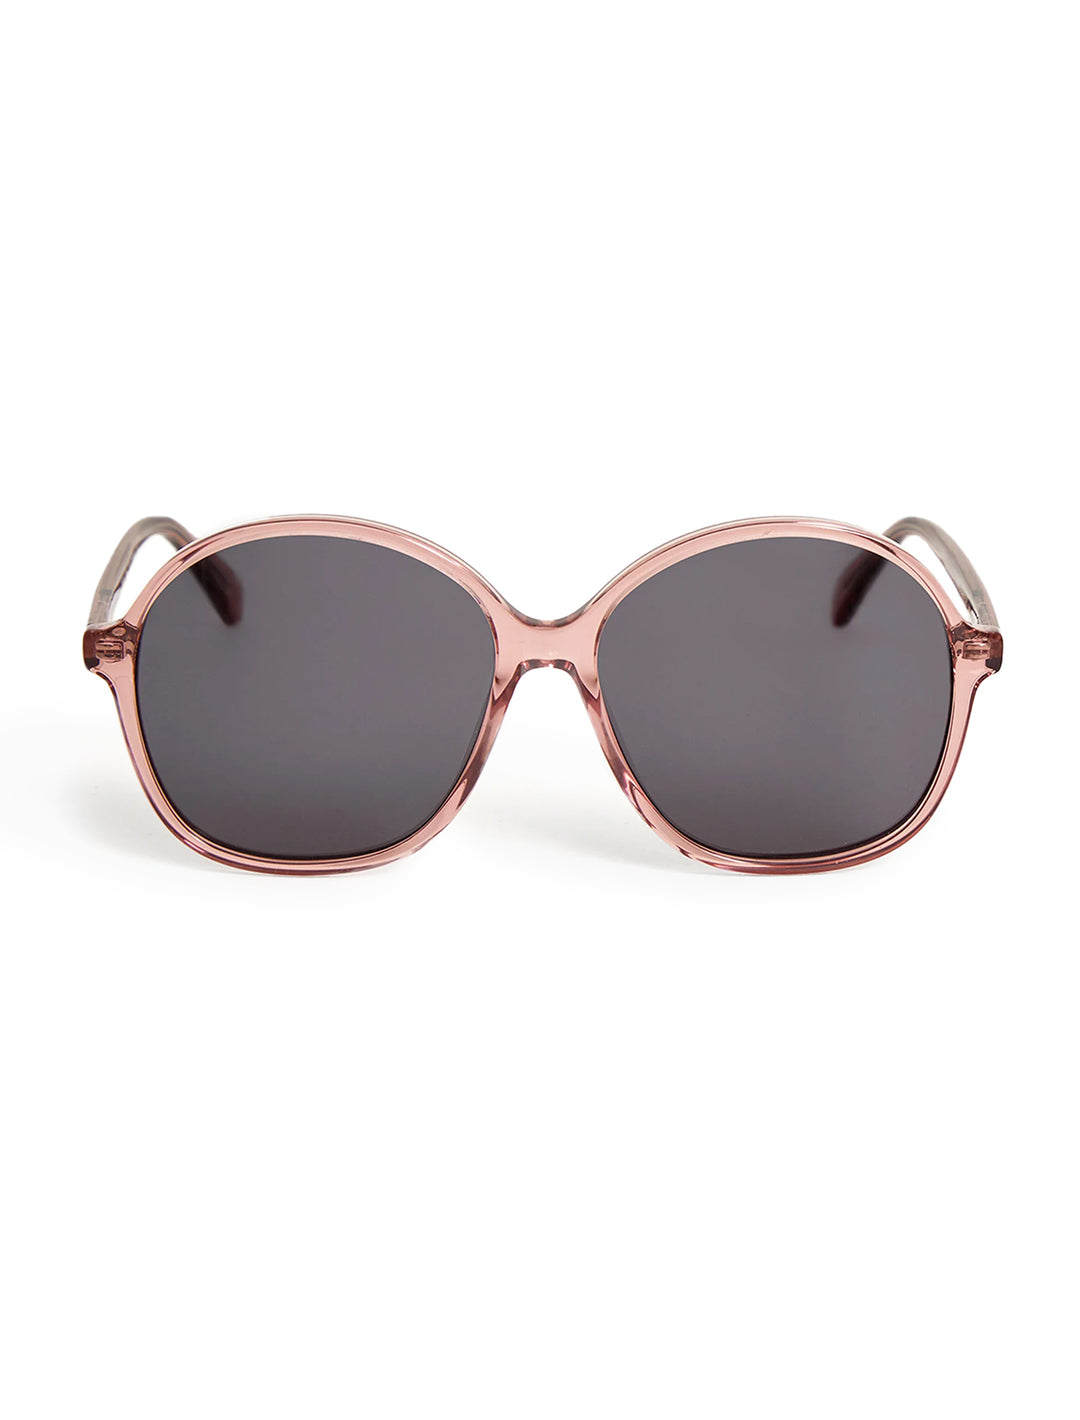 Front view of Clare V.'s jane sunglasses in mauve.